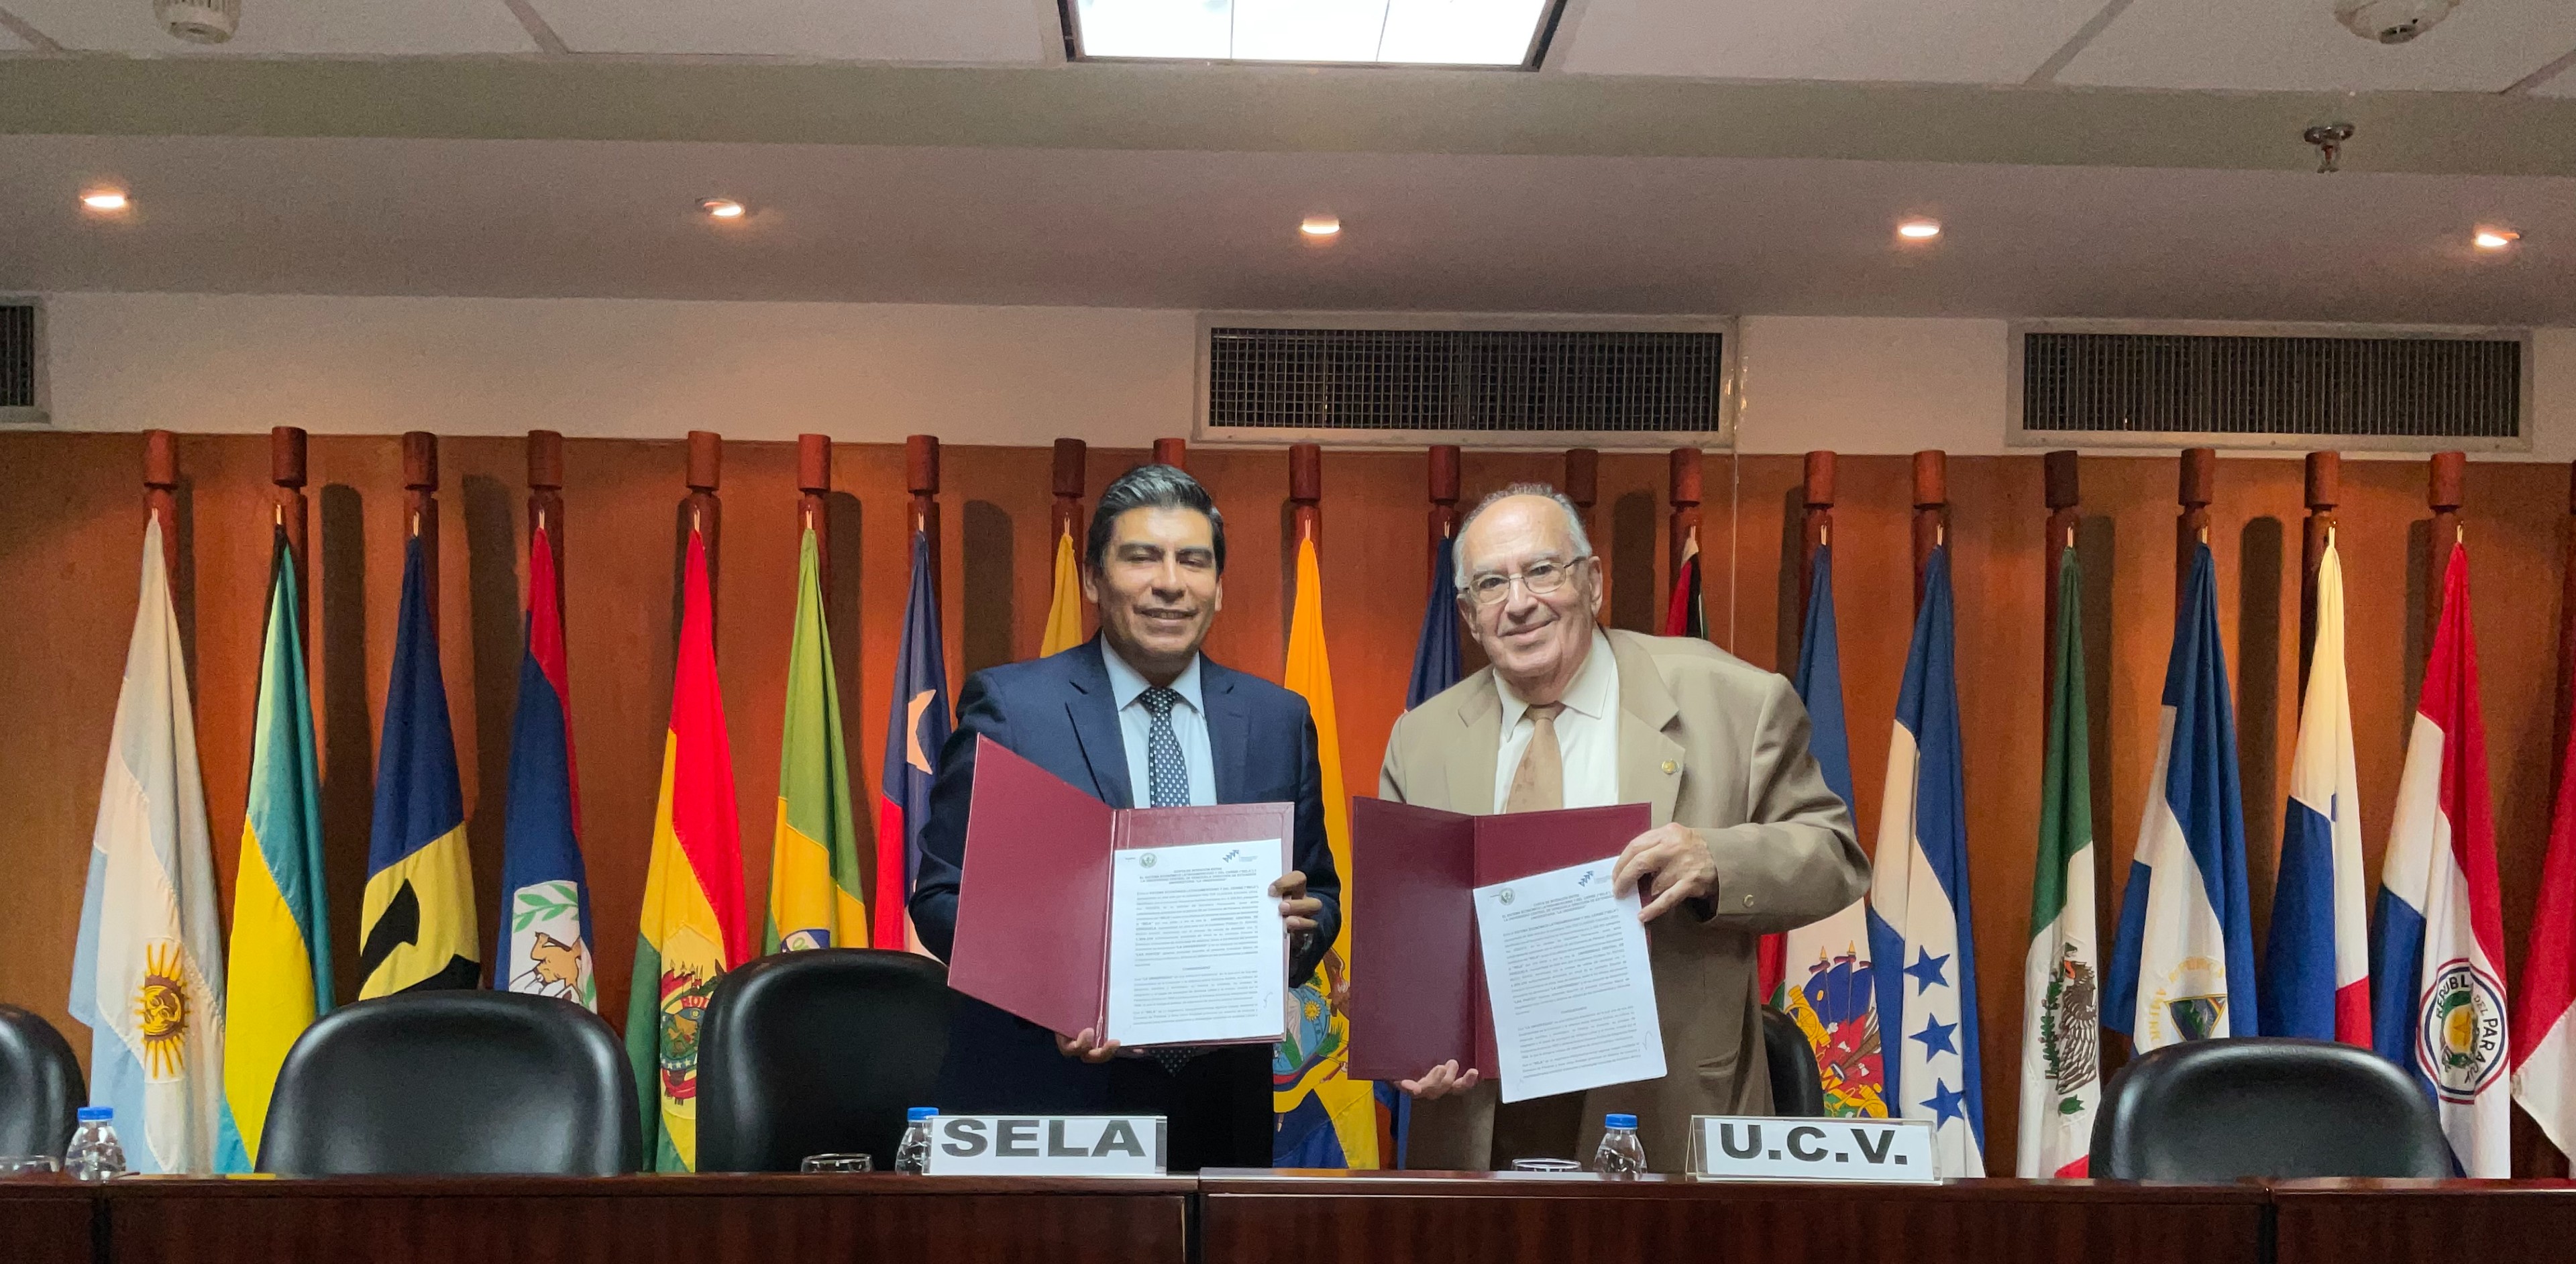 SELA and UCV sign institutional cooperation agreement